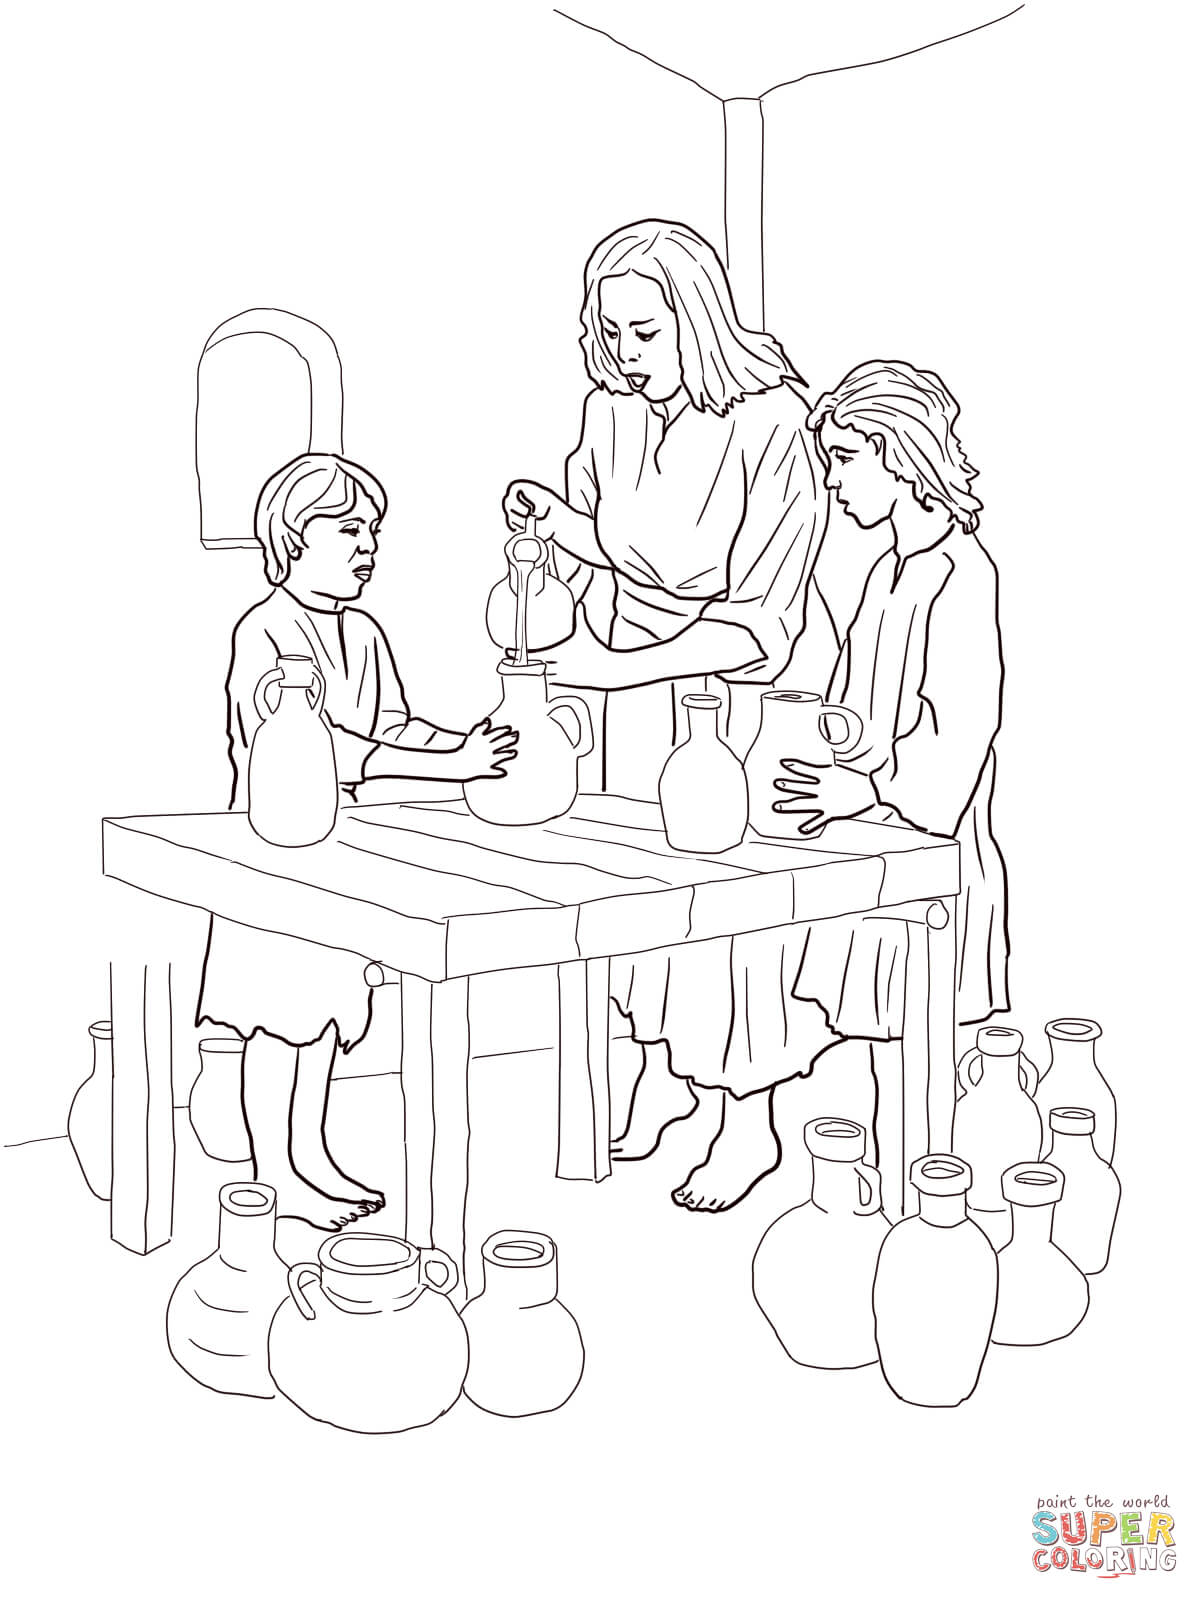 Elisha helps widow coloring page free printable coloring pages